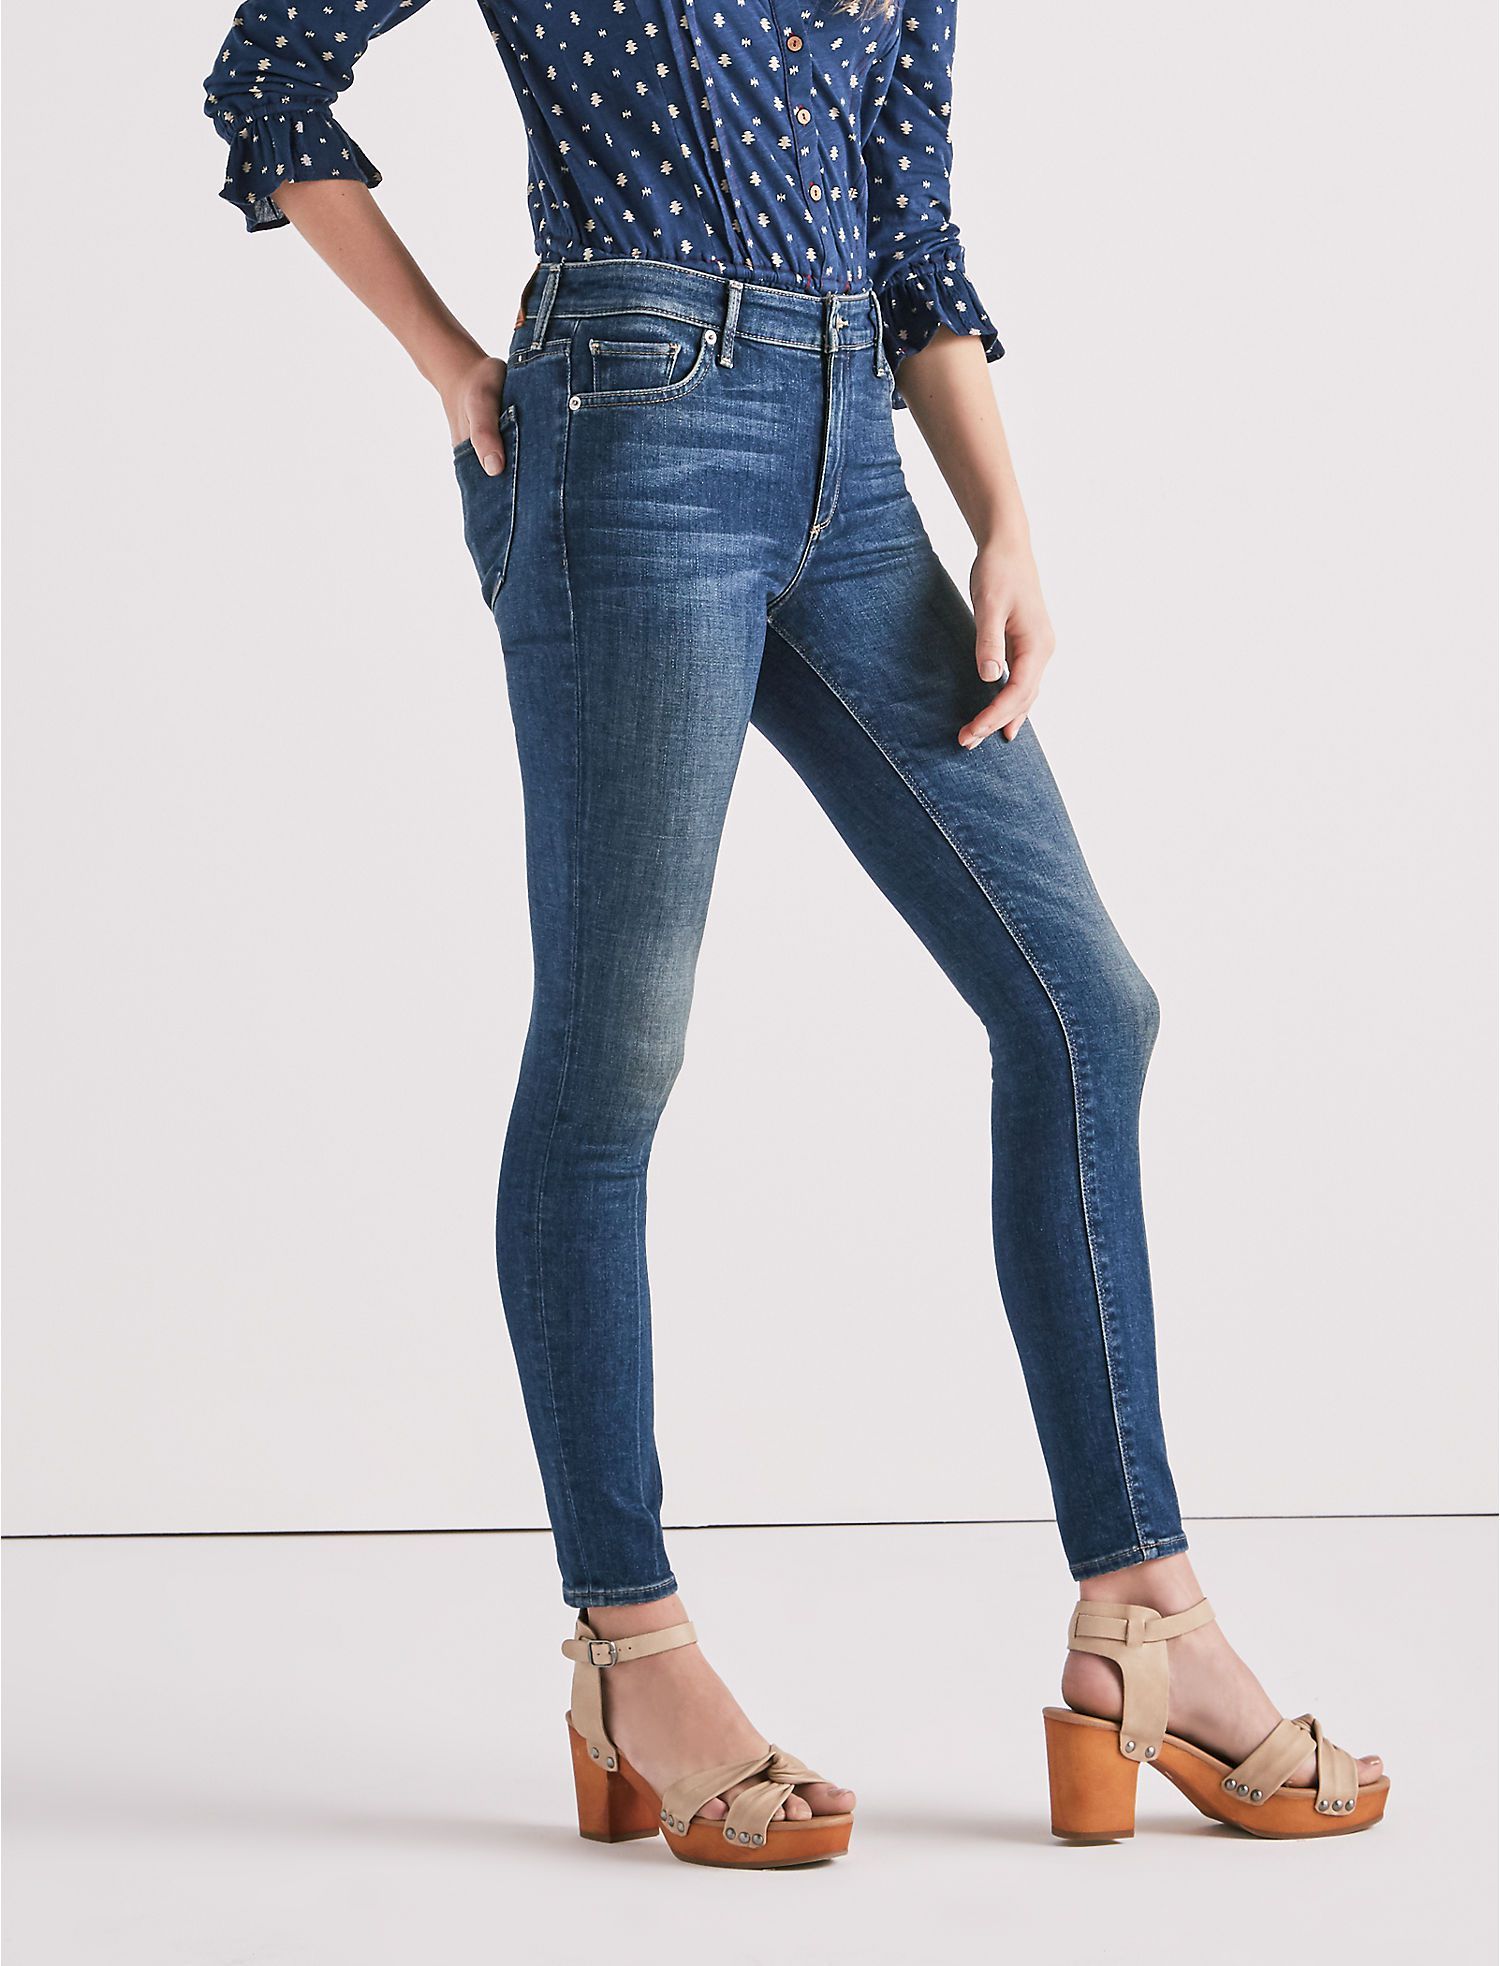 These Waist-Hugging Jeans With Four Inseam Lengths